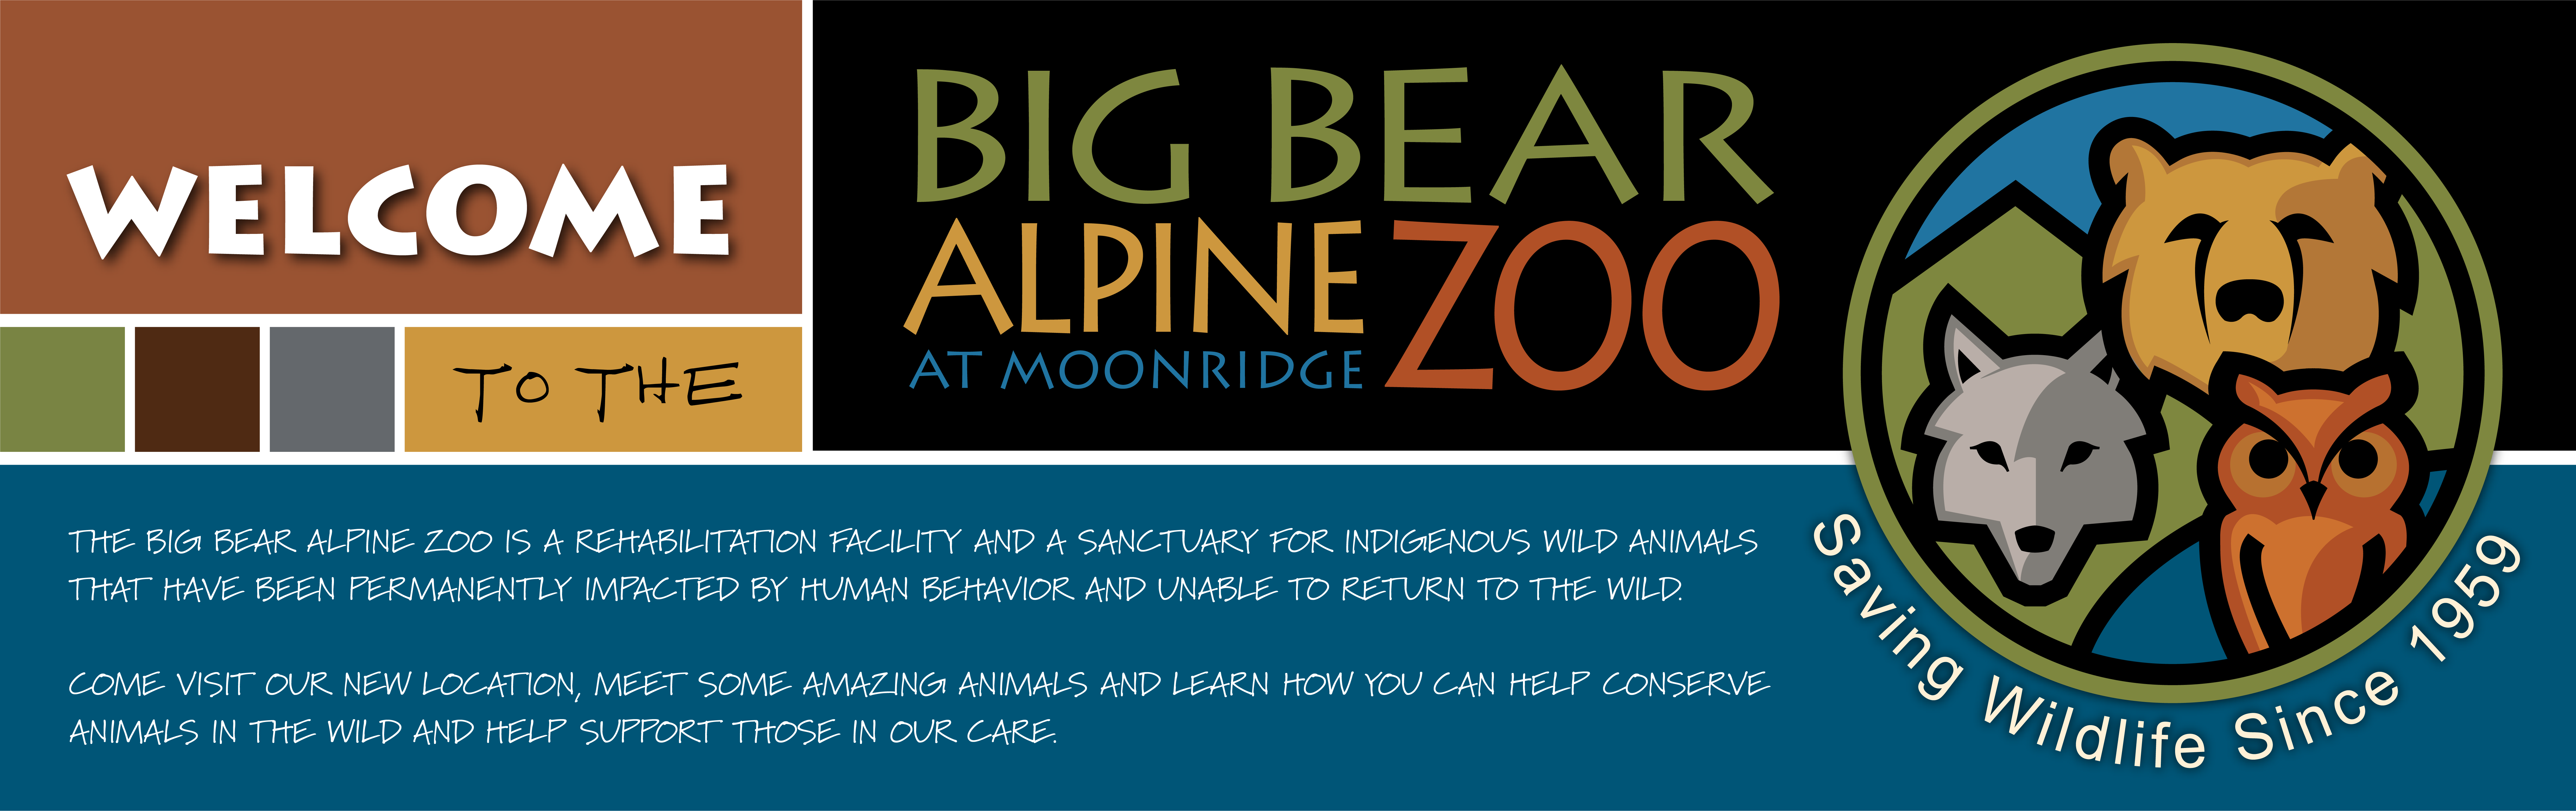 Welcome to the Big Bear Alpine At Moonridge Zoo. The big bear alpine zoo is a rehabilitation facility and a sanctuary for indigenous wild animals that have been permanently impacted by human behavior and unable to return to the wild. Come visit our new location, meet some amazing animals and learn how you can help conserve animals in the wild and help support those in our care.